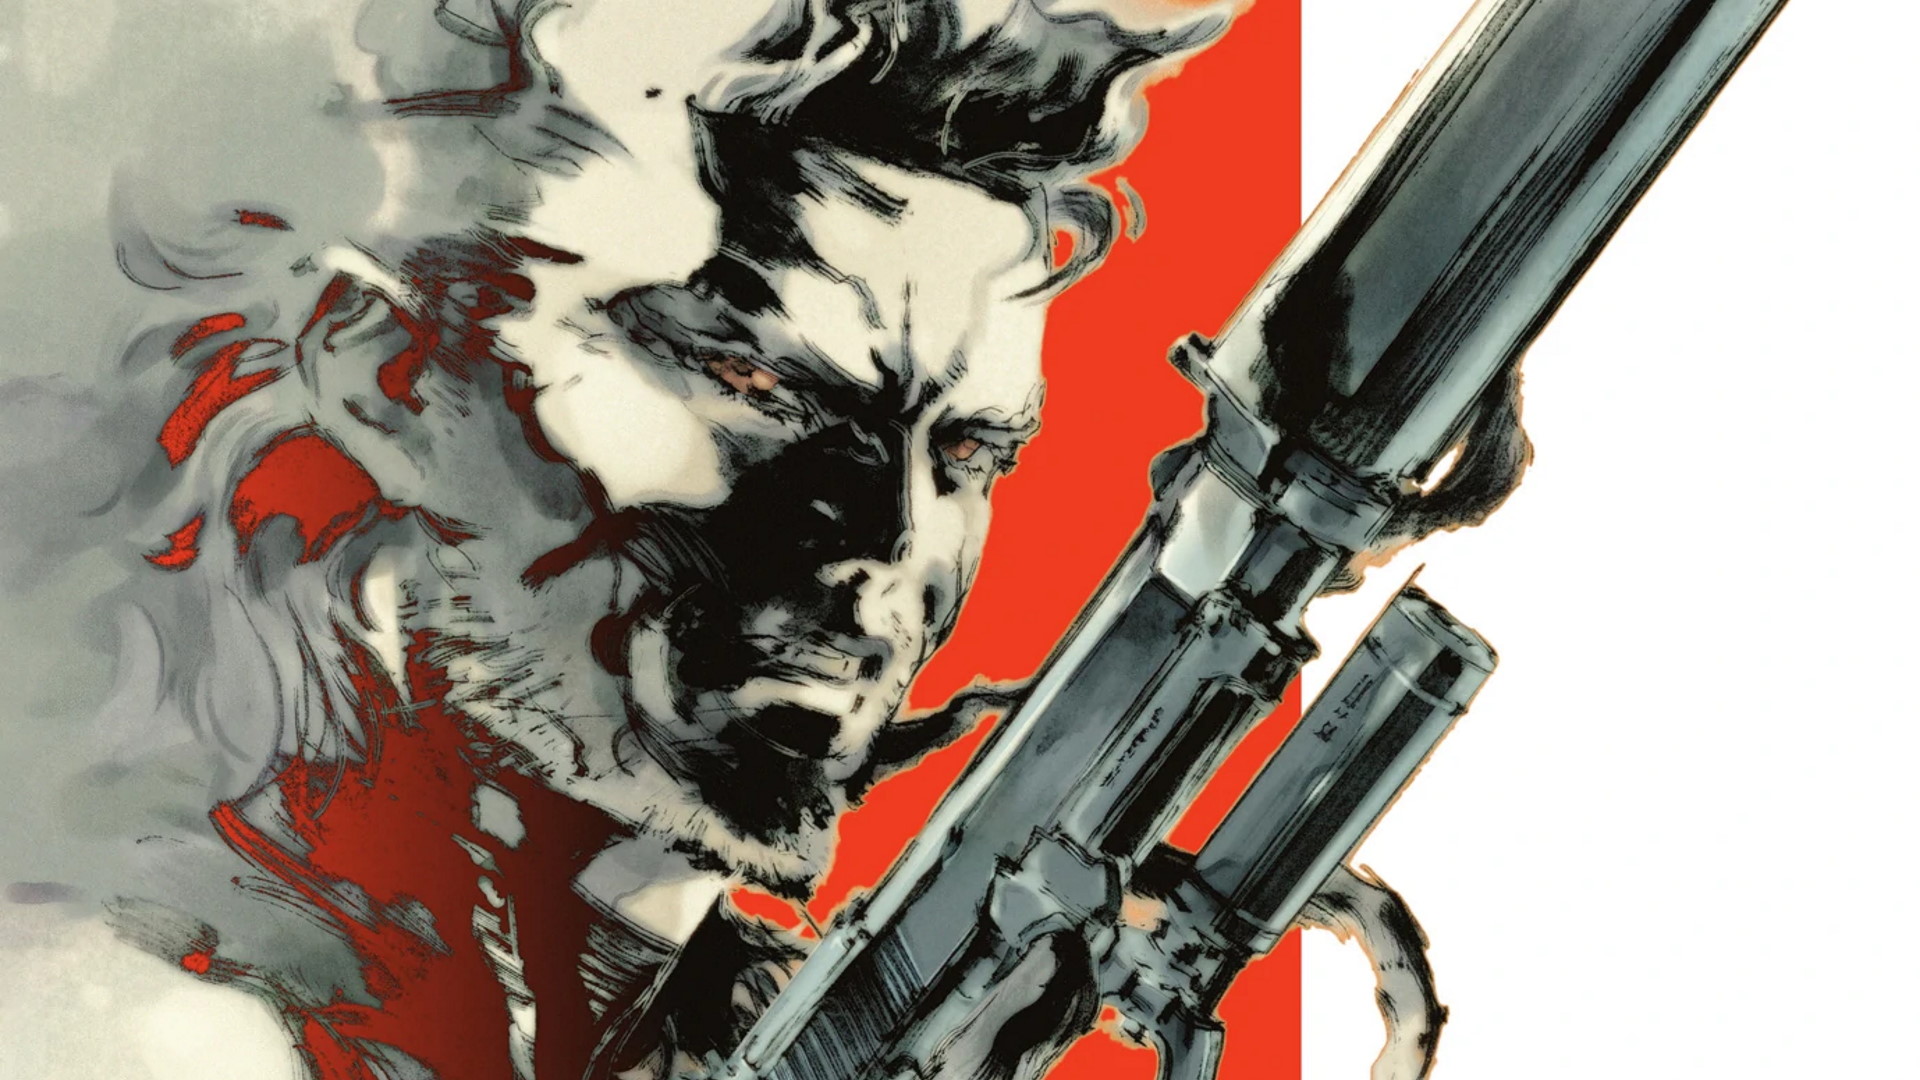 What’s going on with Metal Gear Solid remasters, exactly?